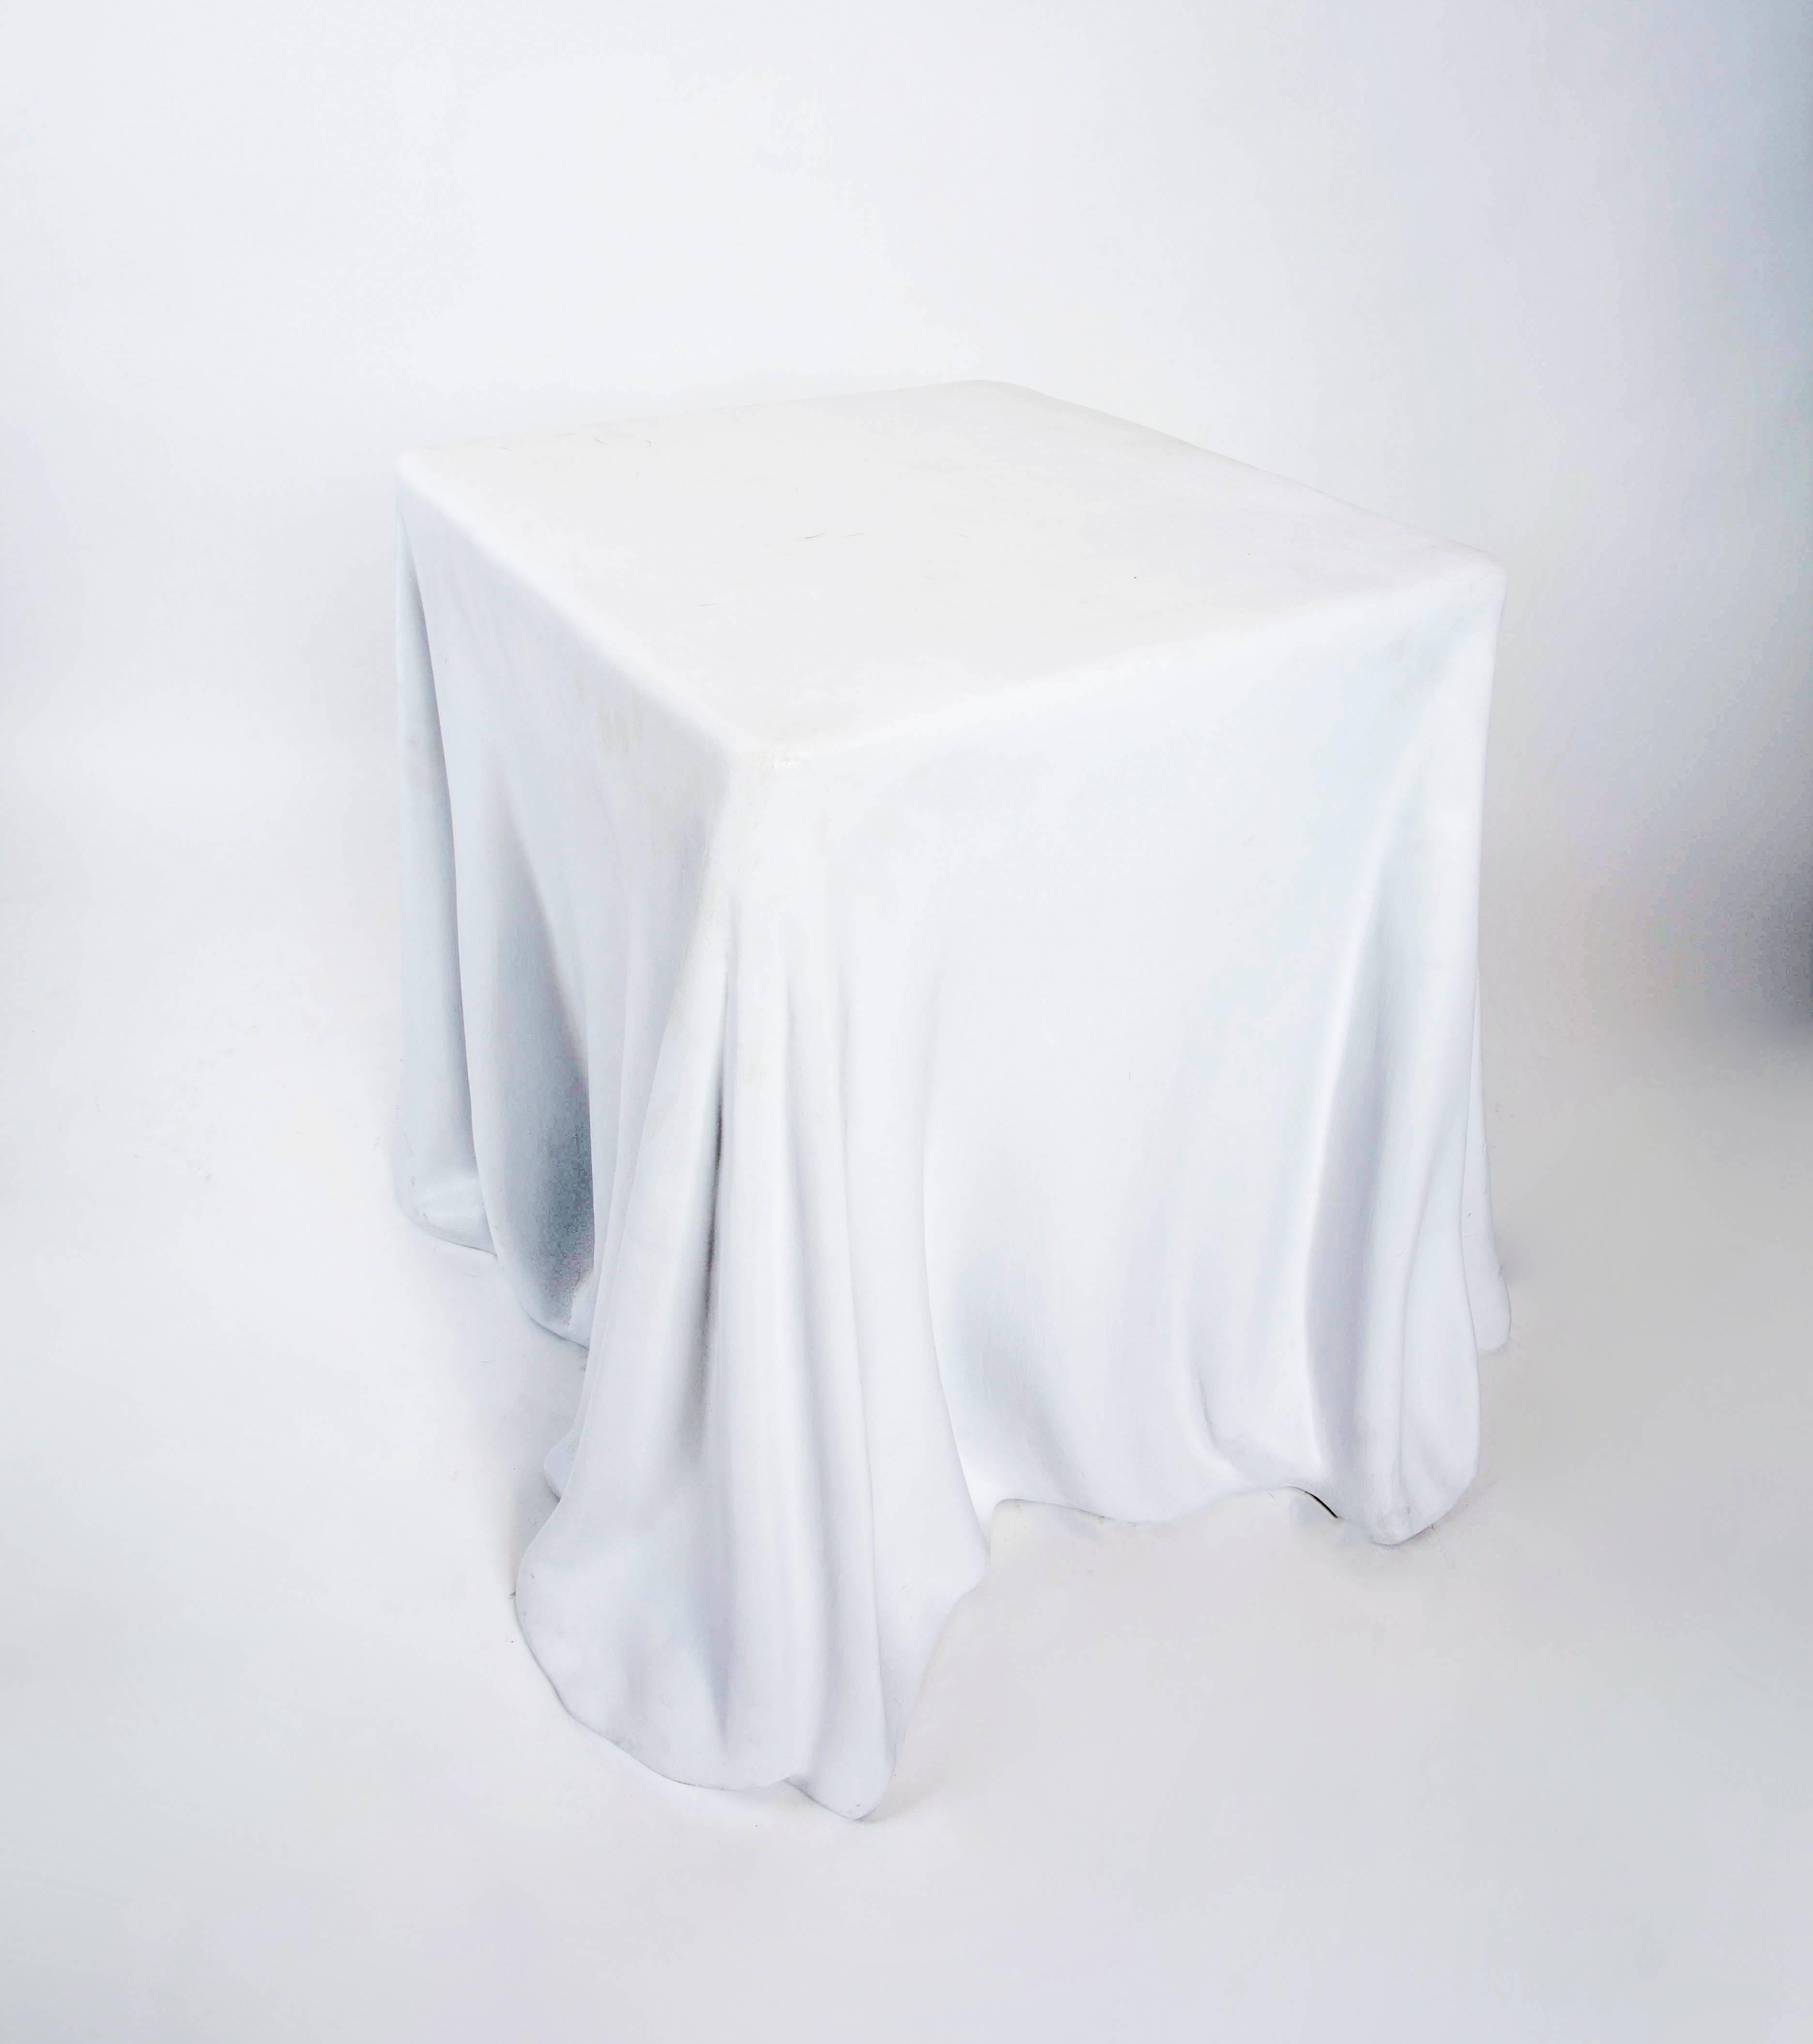 American Realistic Draped Plaster Side Table in the Manner of Alberto Bazzani  C. 1980s